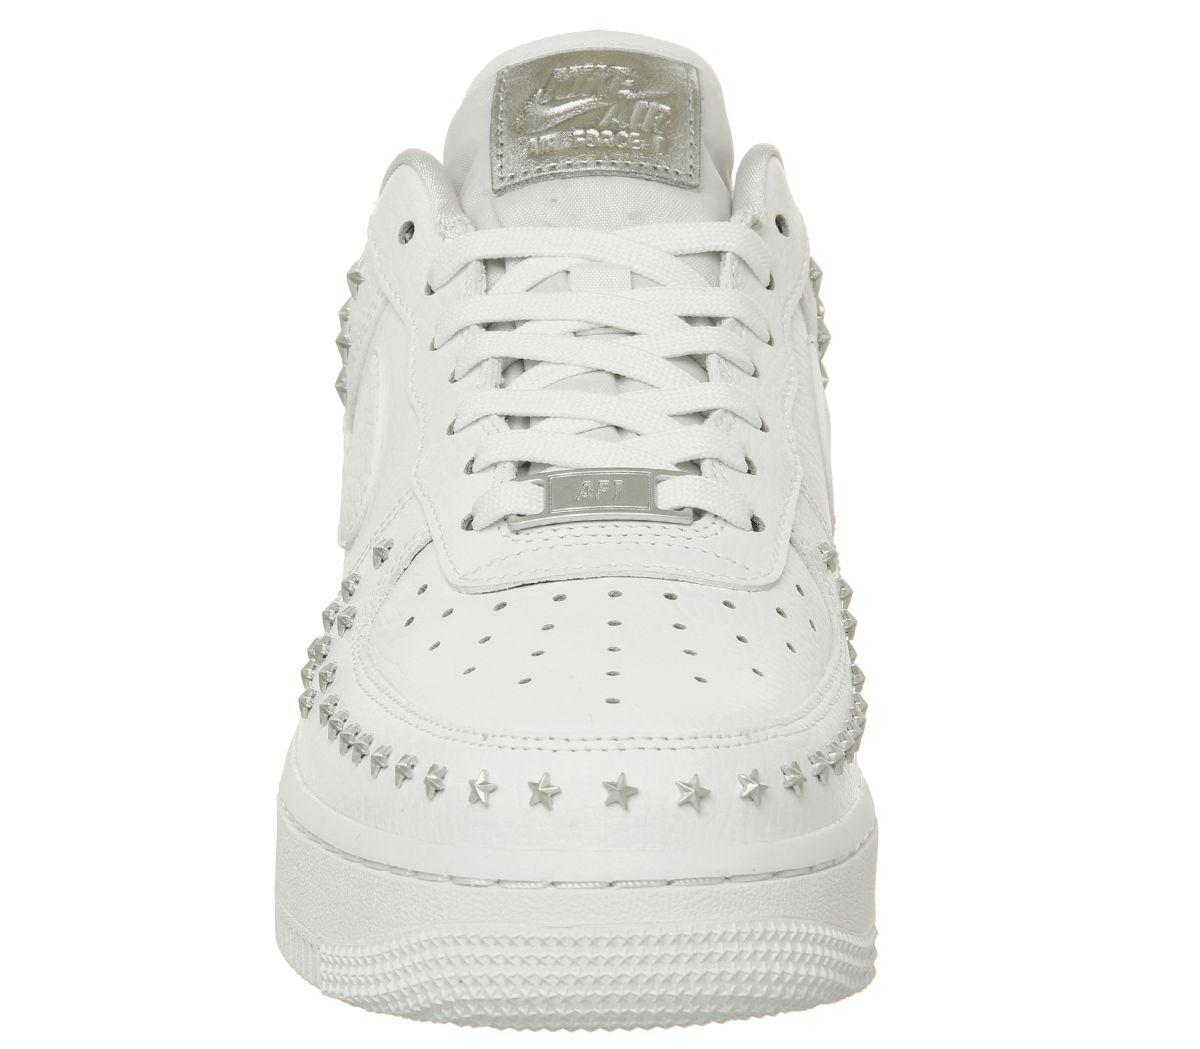 nike air force 1 with star studs